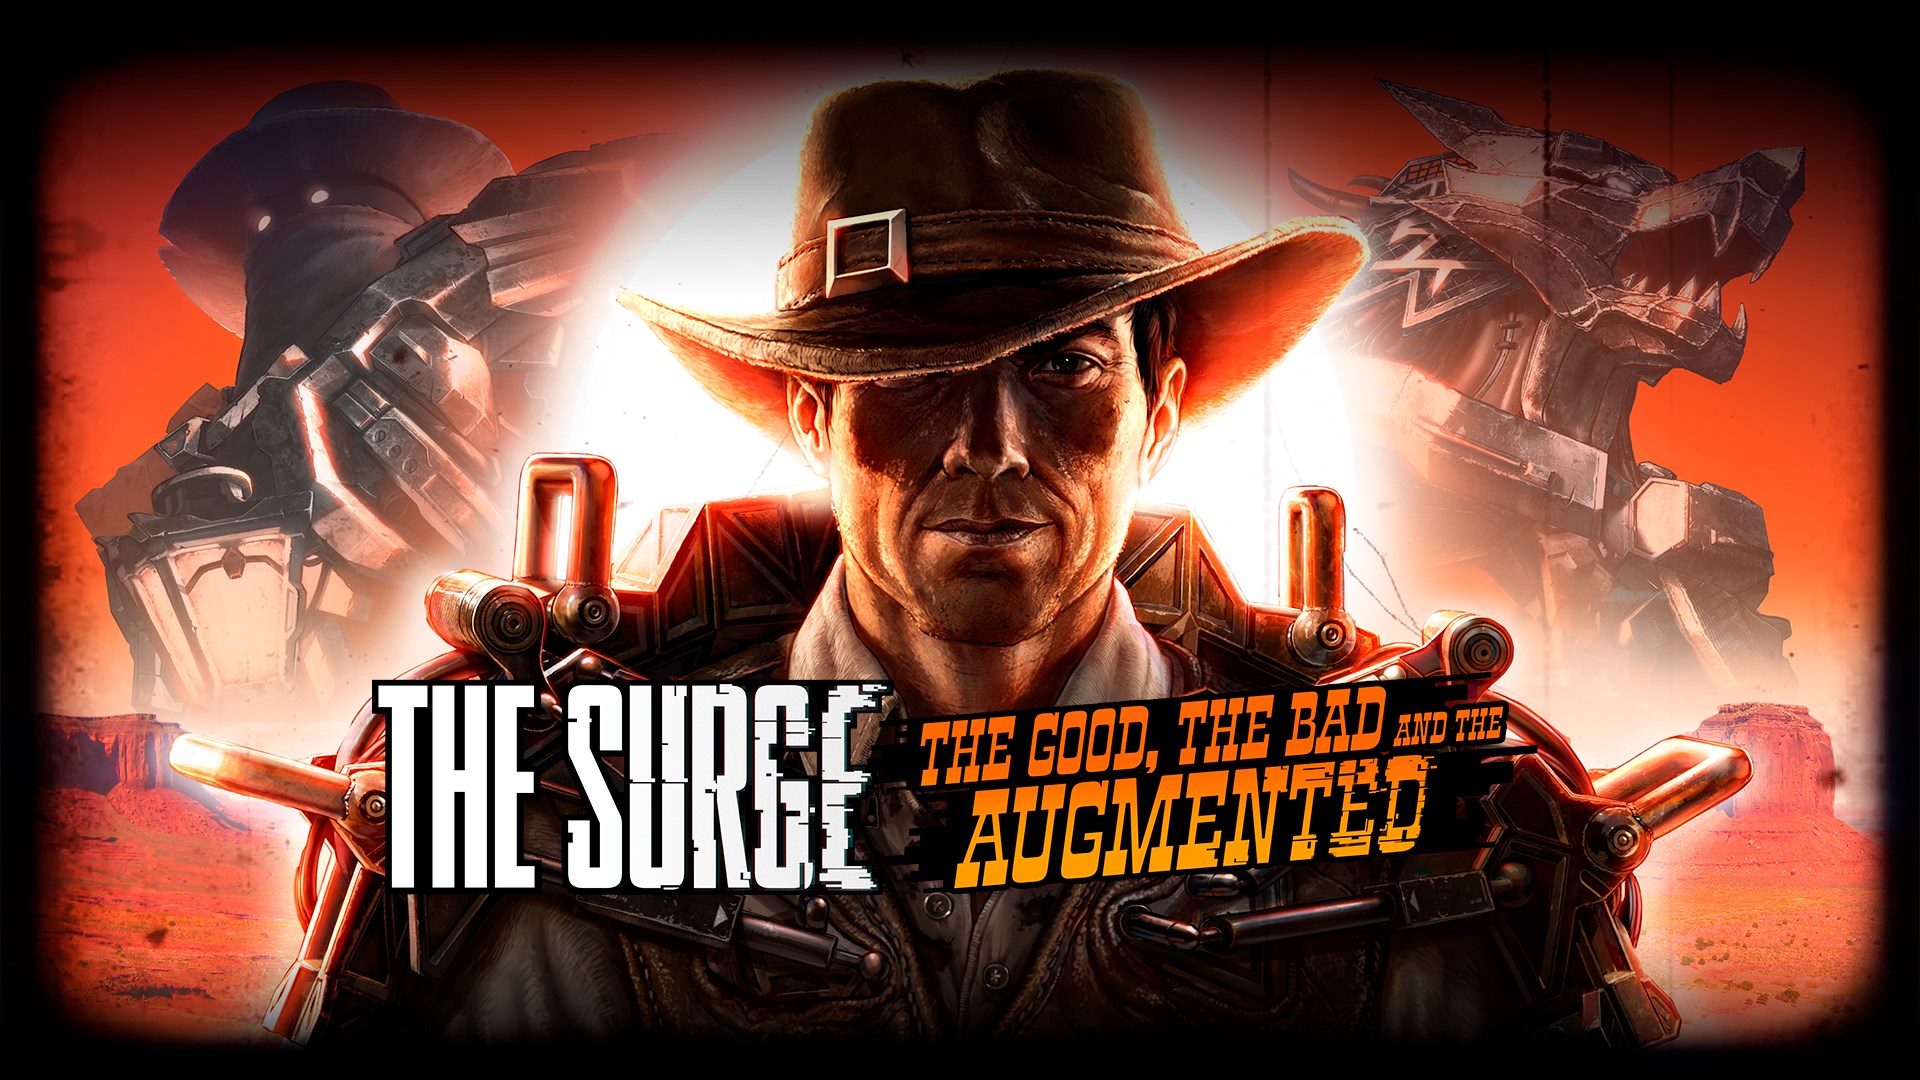 The Surge - The Good, the Bad and the Augmented Expansion